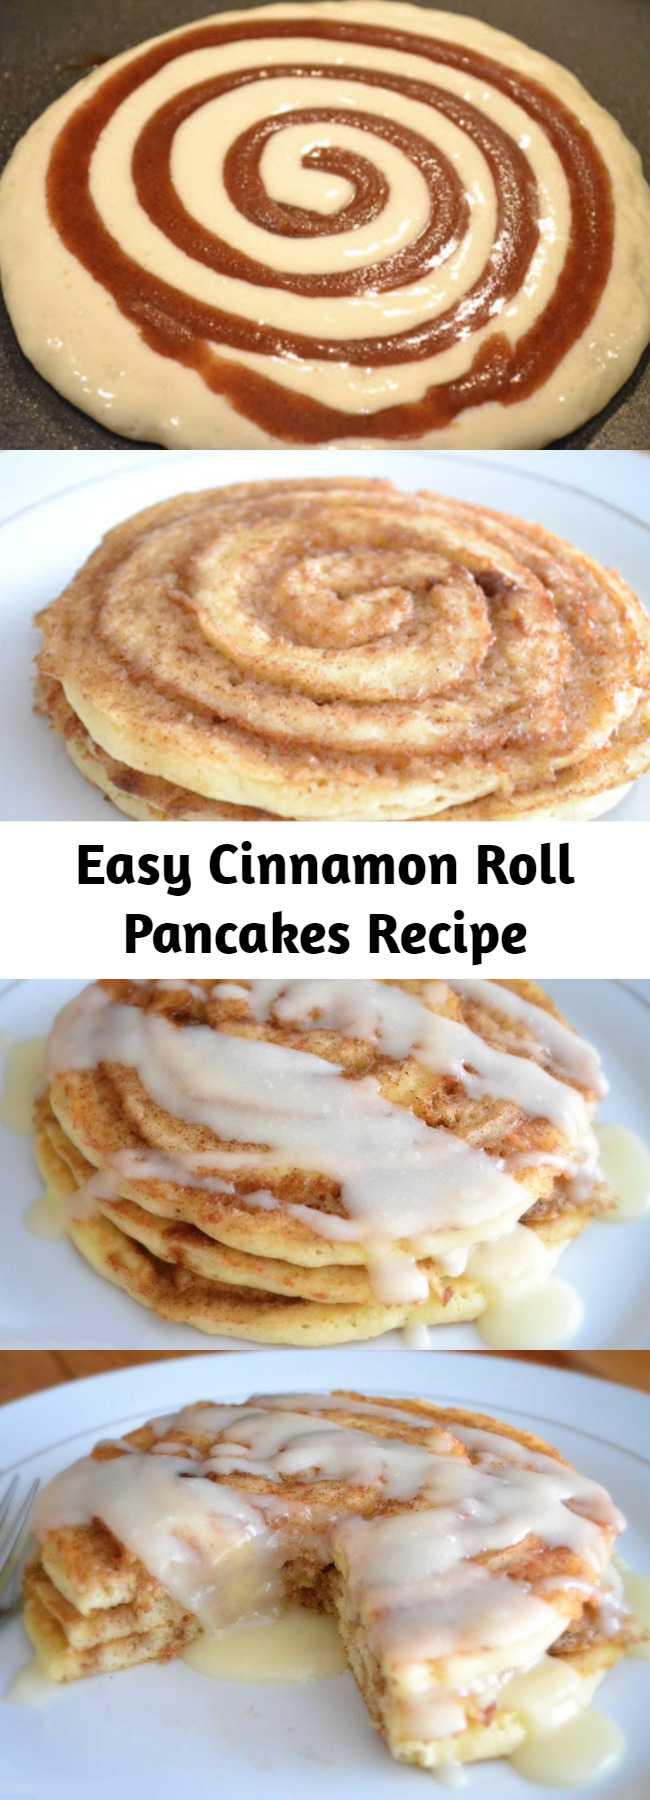 Easy Cinnamon Roll Pancakes Recipe - These Cinnamon Roll Pancakes will be the star of the show at breakfast time! Swirls of cinnamon through out and topped with cream cheese glaze!